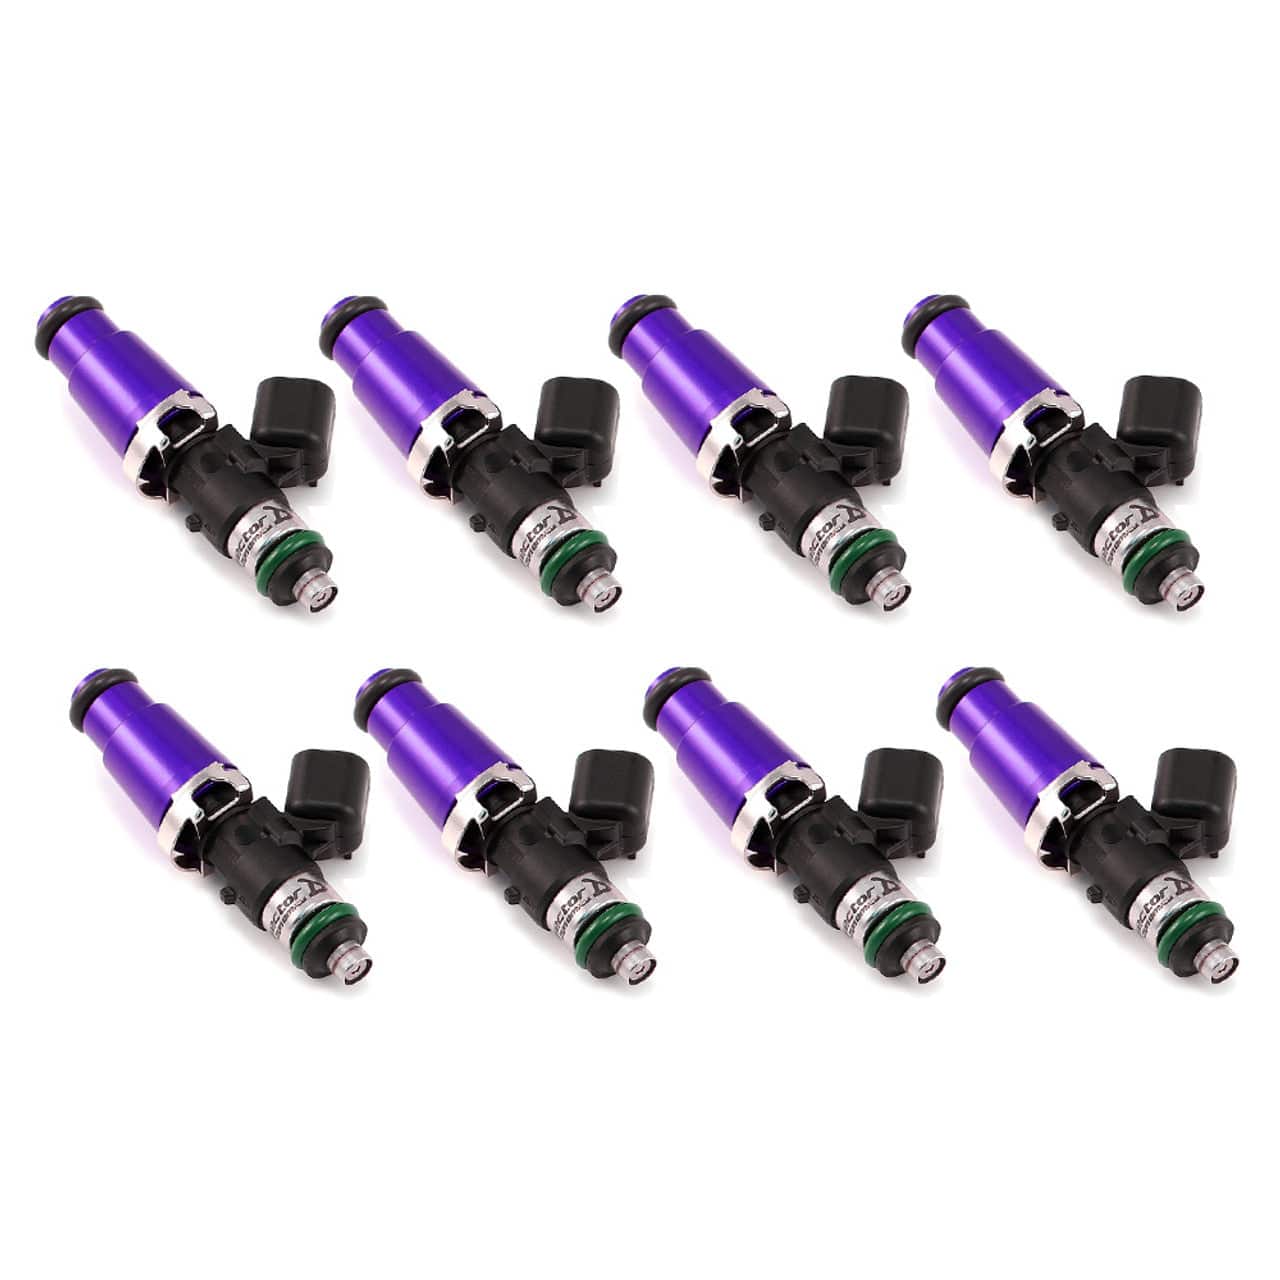 Injector Dynamics ID2000, for BMW E90 / E92 / E93 M3 2007+, 14mm (grey) adapter top. Set of 8.